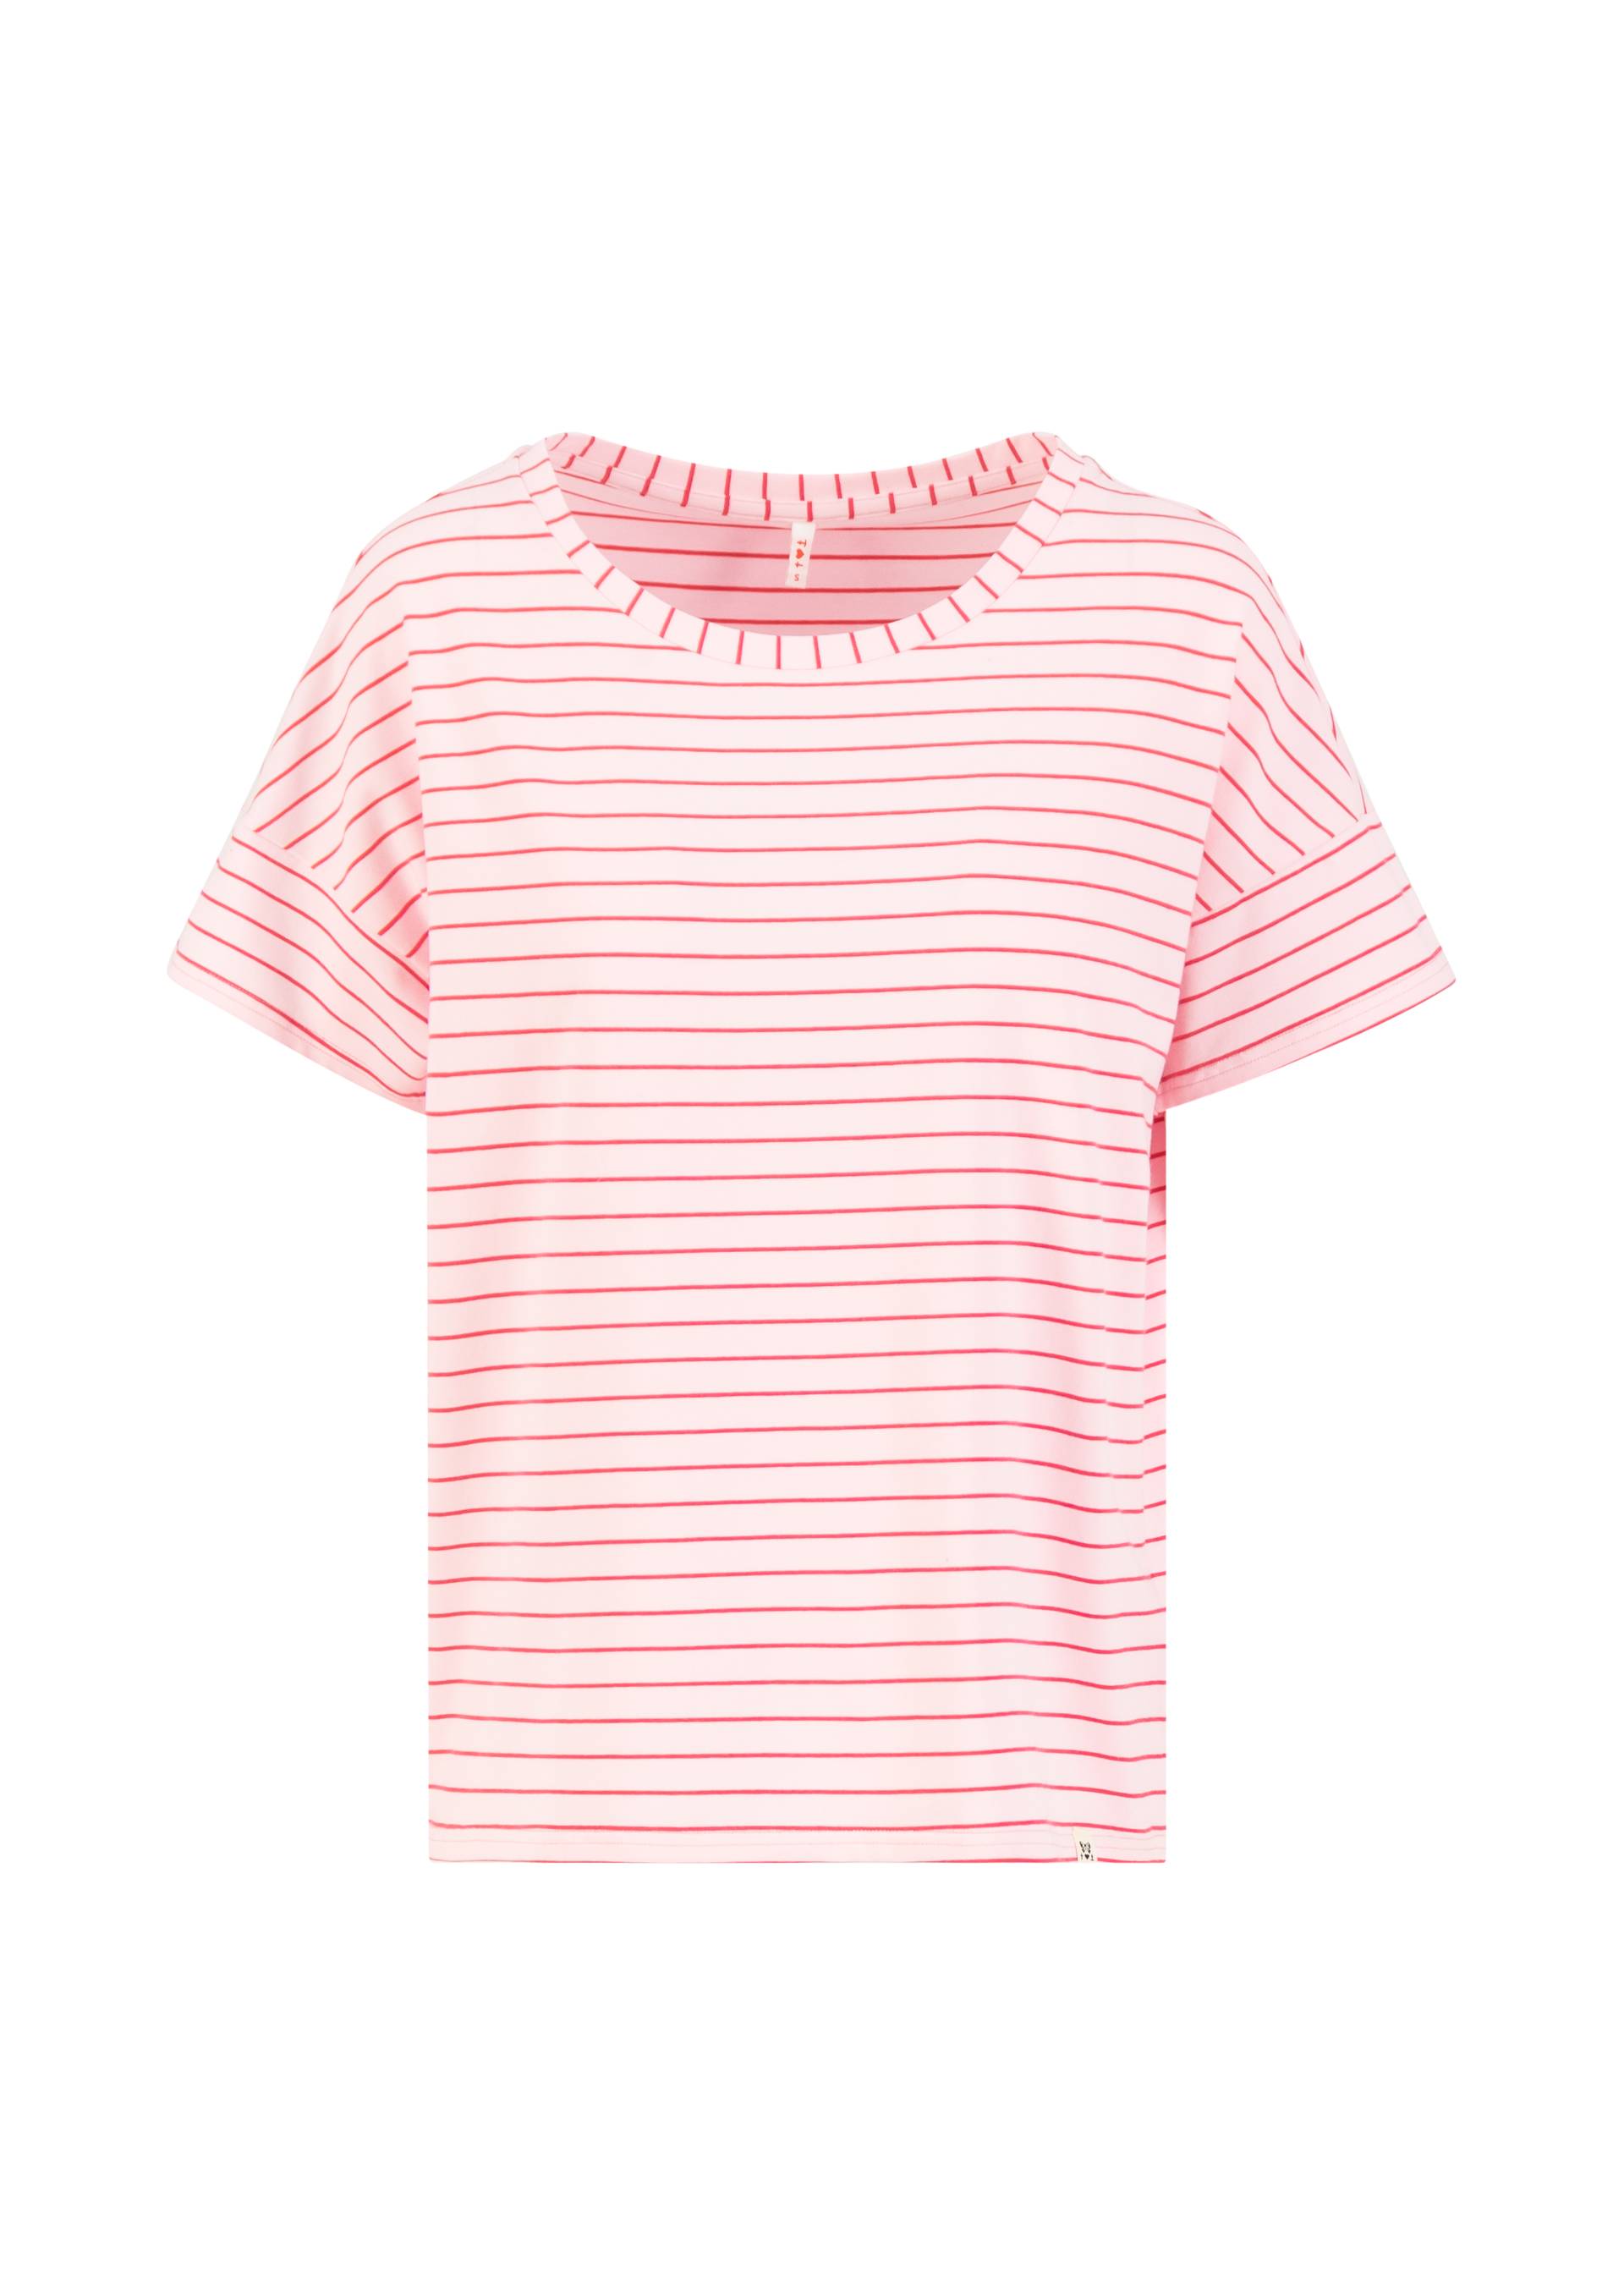 T-Shirt The Generous One, strawberry stripes, Tops, Pink